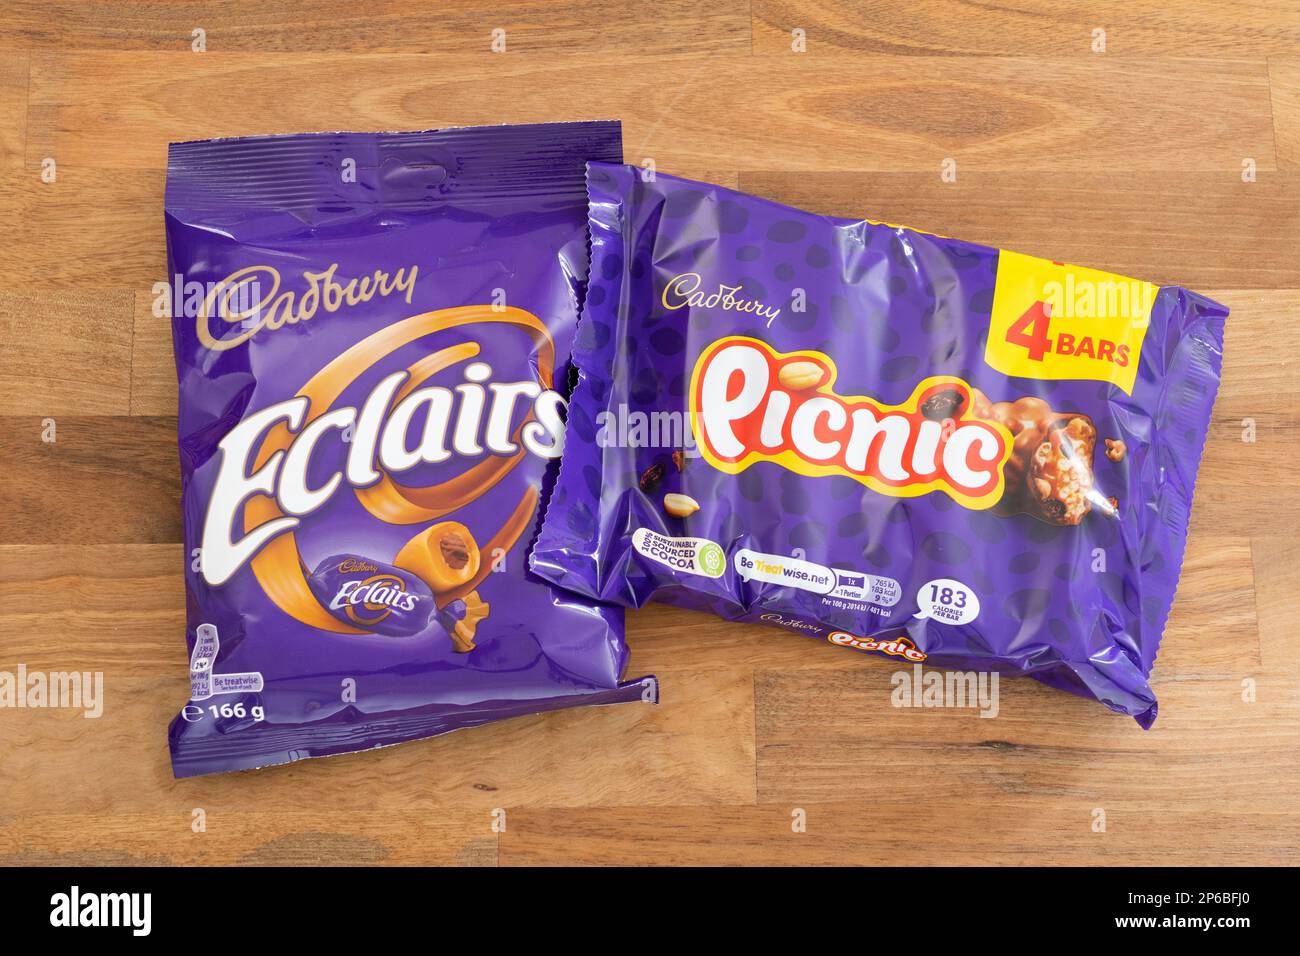 A packet of Cadbury chocolate eclairs and a pack of Cadbury picnic chocolate bars. Theme: market leader, Cadbury brand, chocolate confectionary Stock Photo